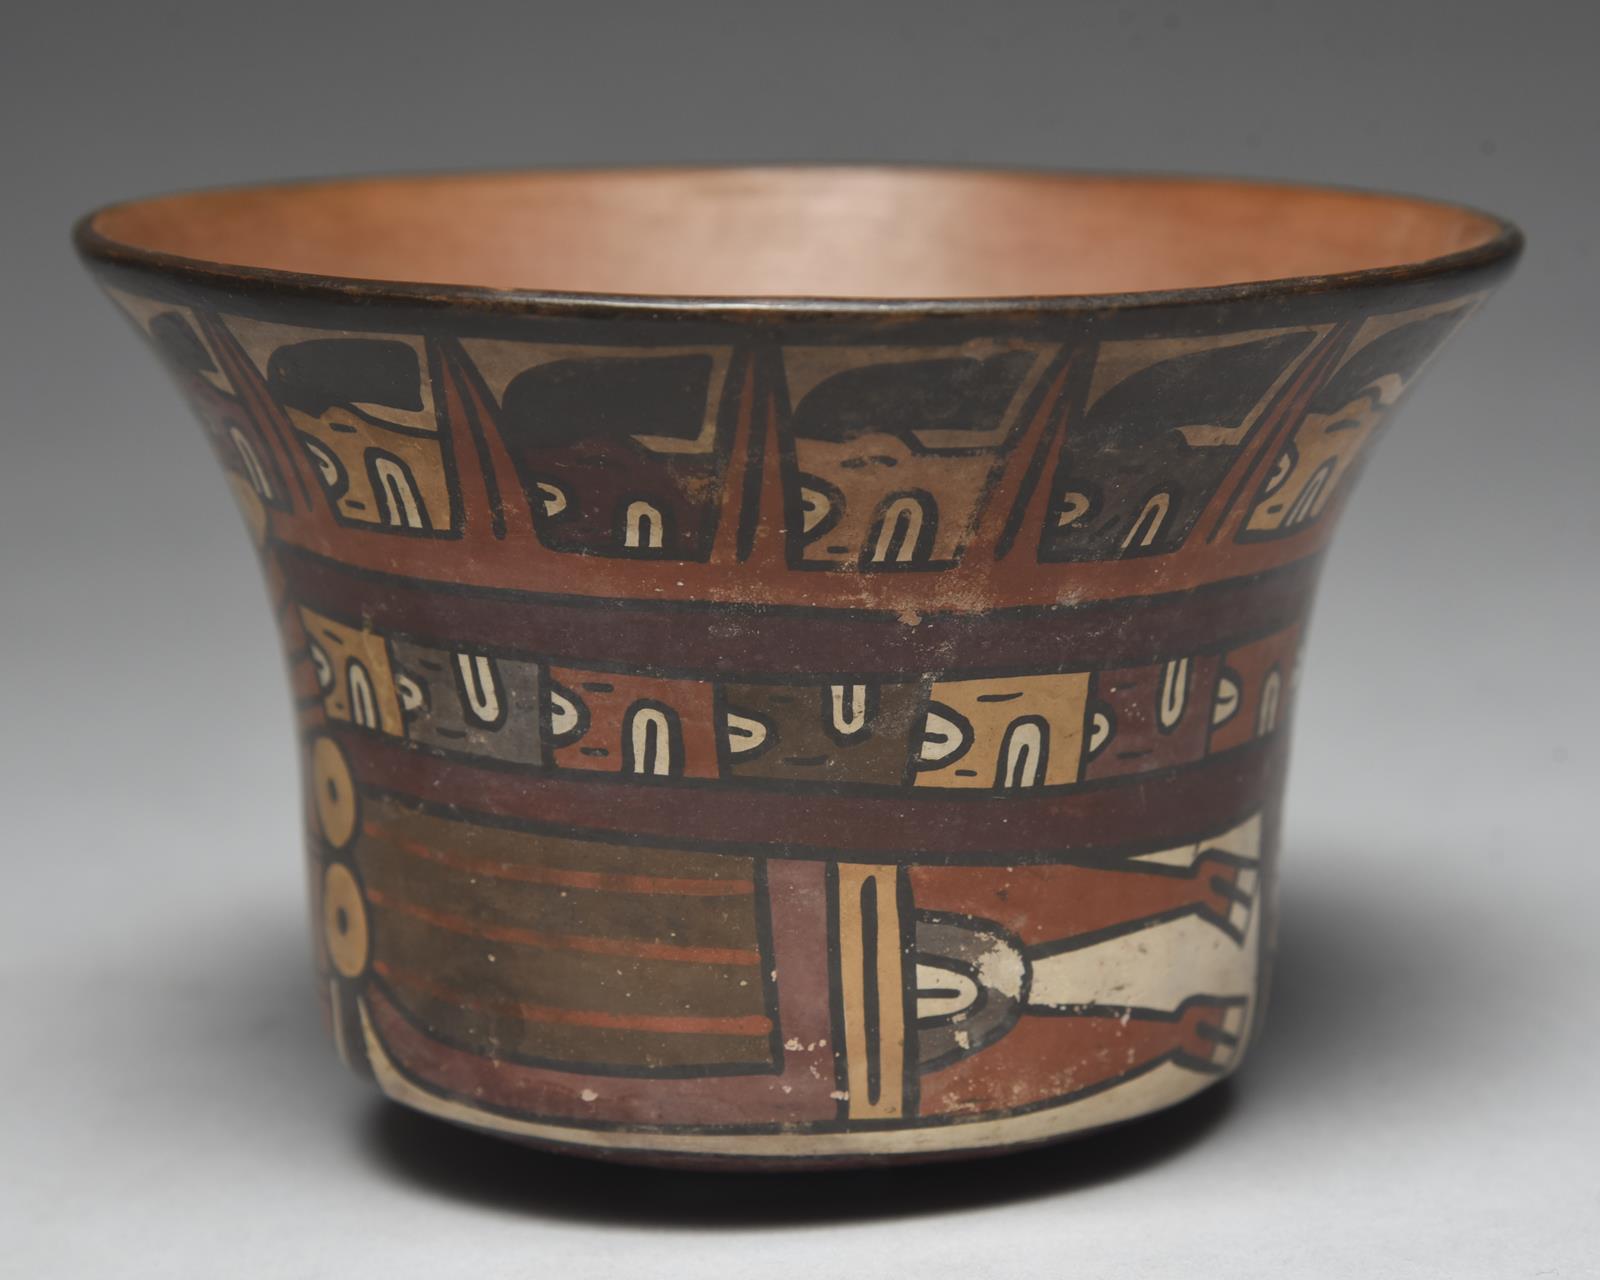 A Nazca bowl Peru, circa 200 - 600 AD pottery, painted a mythical flying being with trophy heads - Image 3 of 5